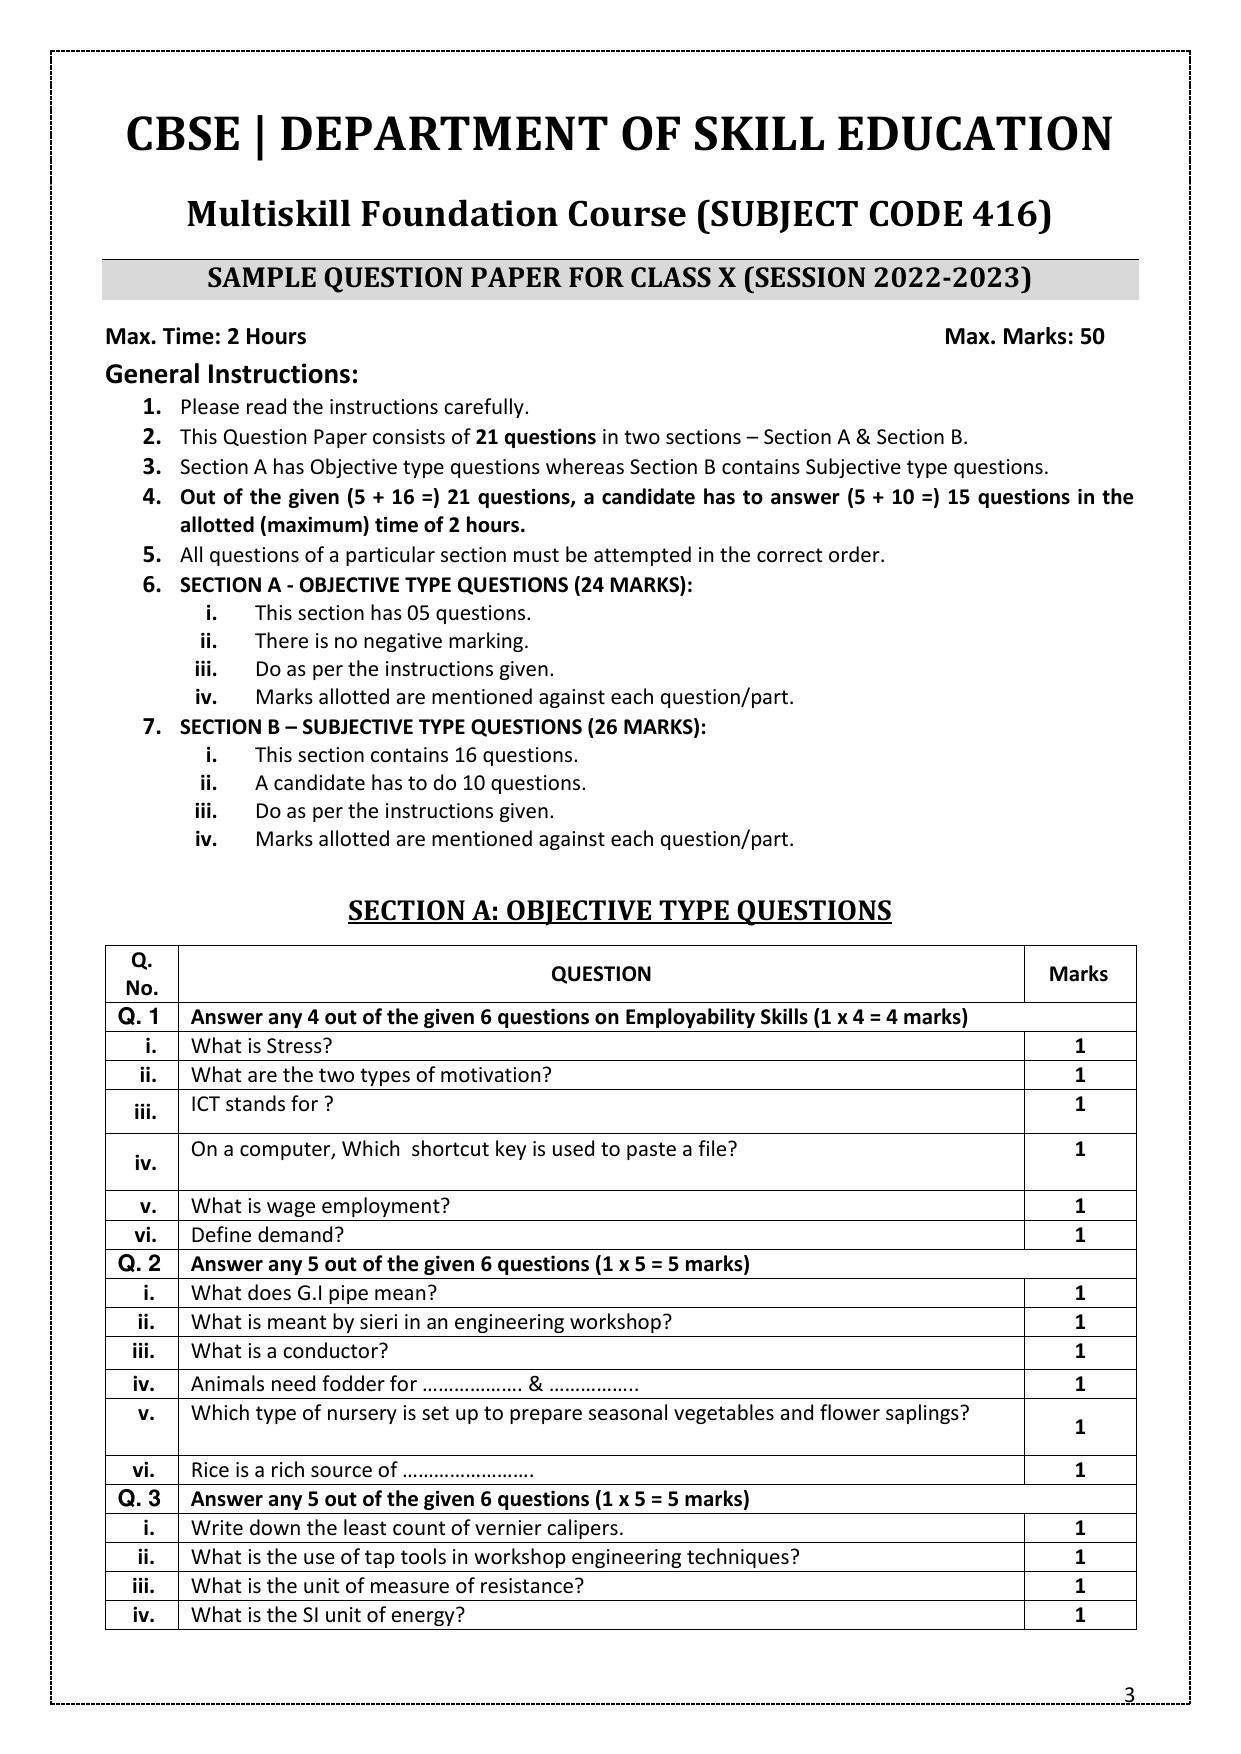 CBSE Class 10 (Skill Education) Multi Skill Foundation COURSE Sample Papers 2023 - Page 3